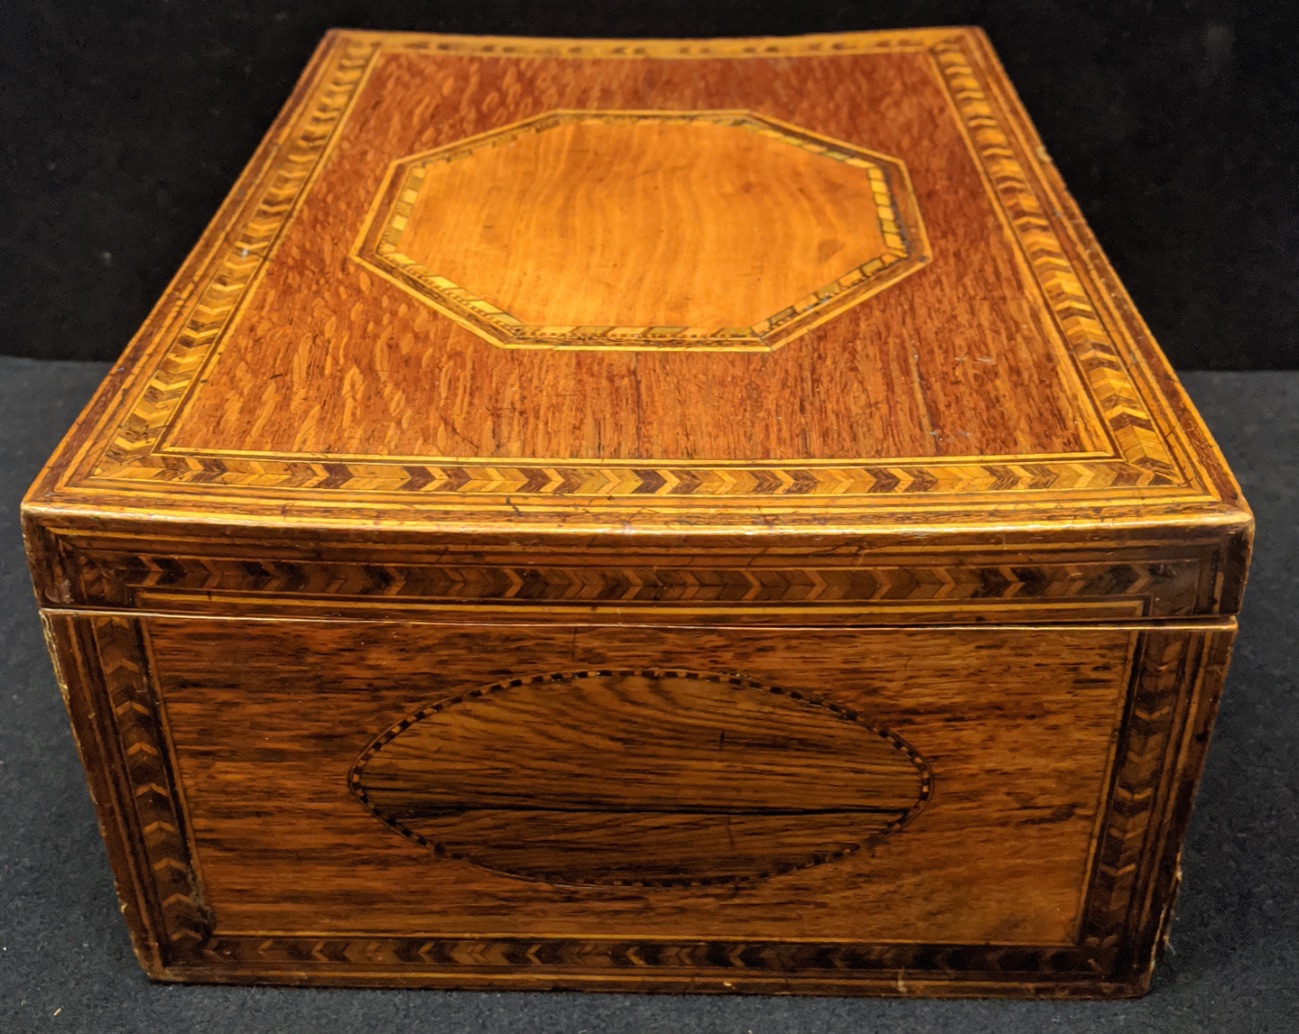 A 19th century walnut parquetry inlaid box, lower drawer, H.13cm L.27cm D.21cm - Image 2 of 3